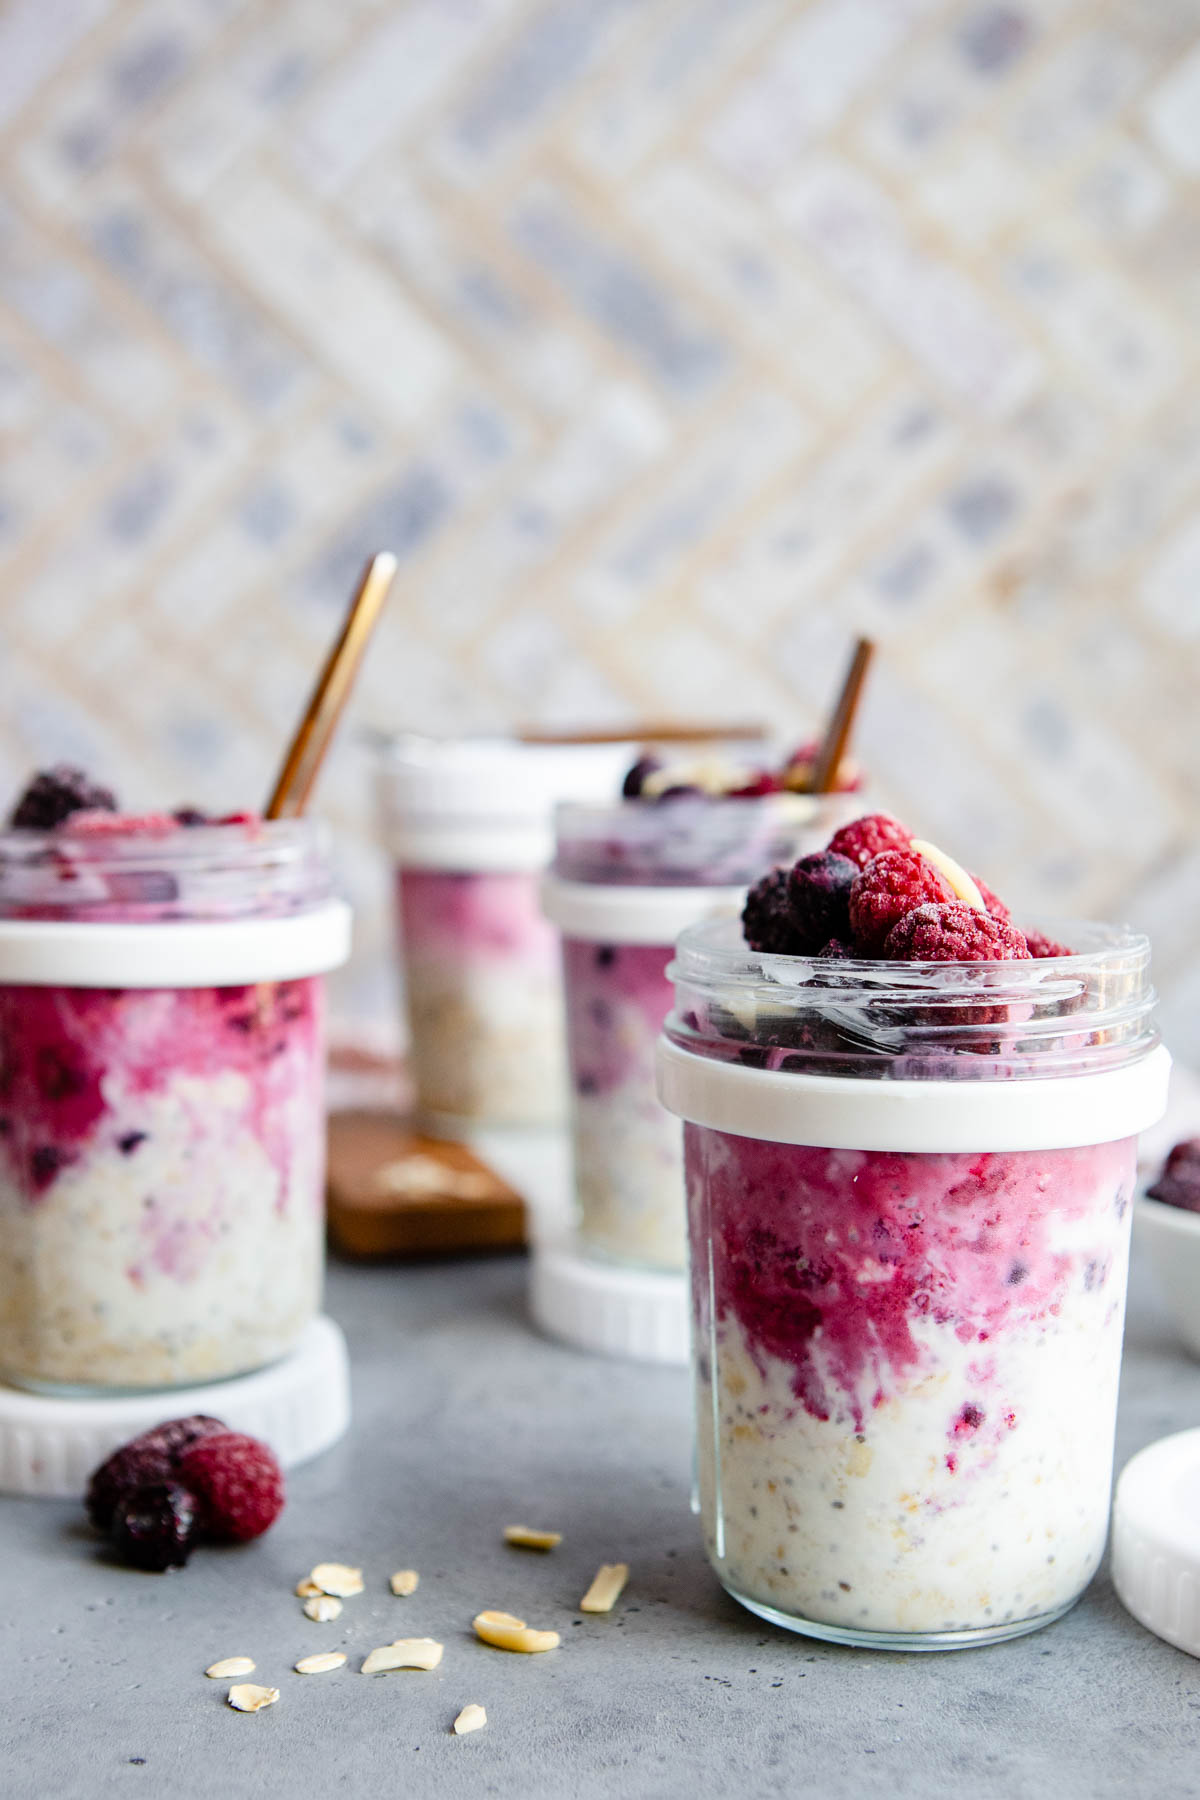 overnight oats with frozen fruit in meal prep jars on a gray surface 